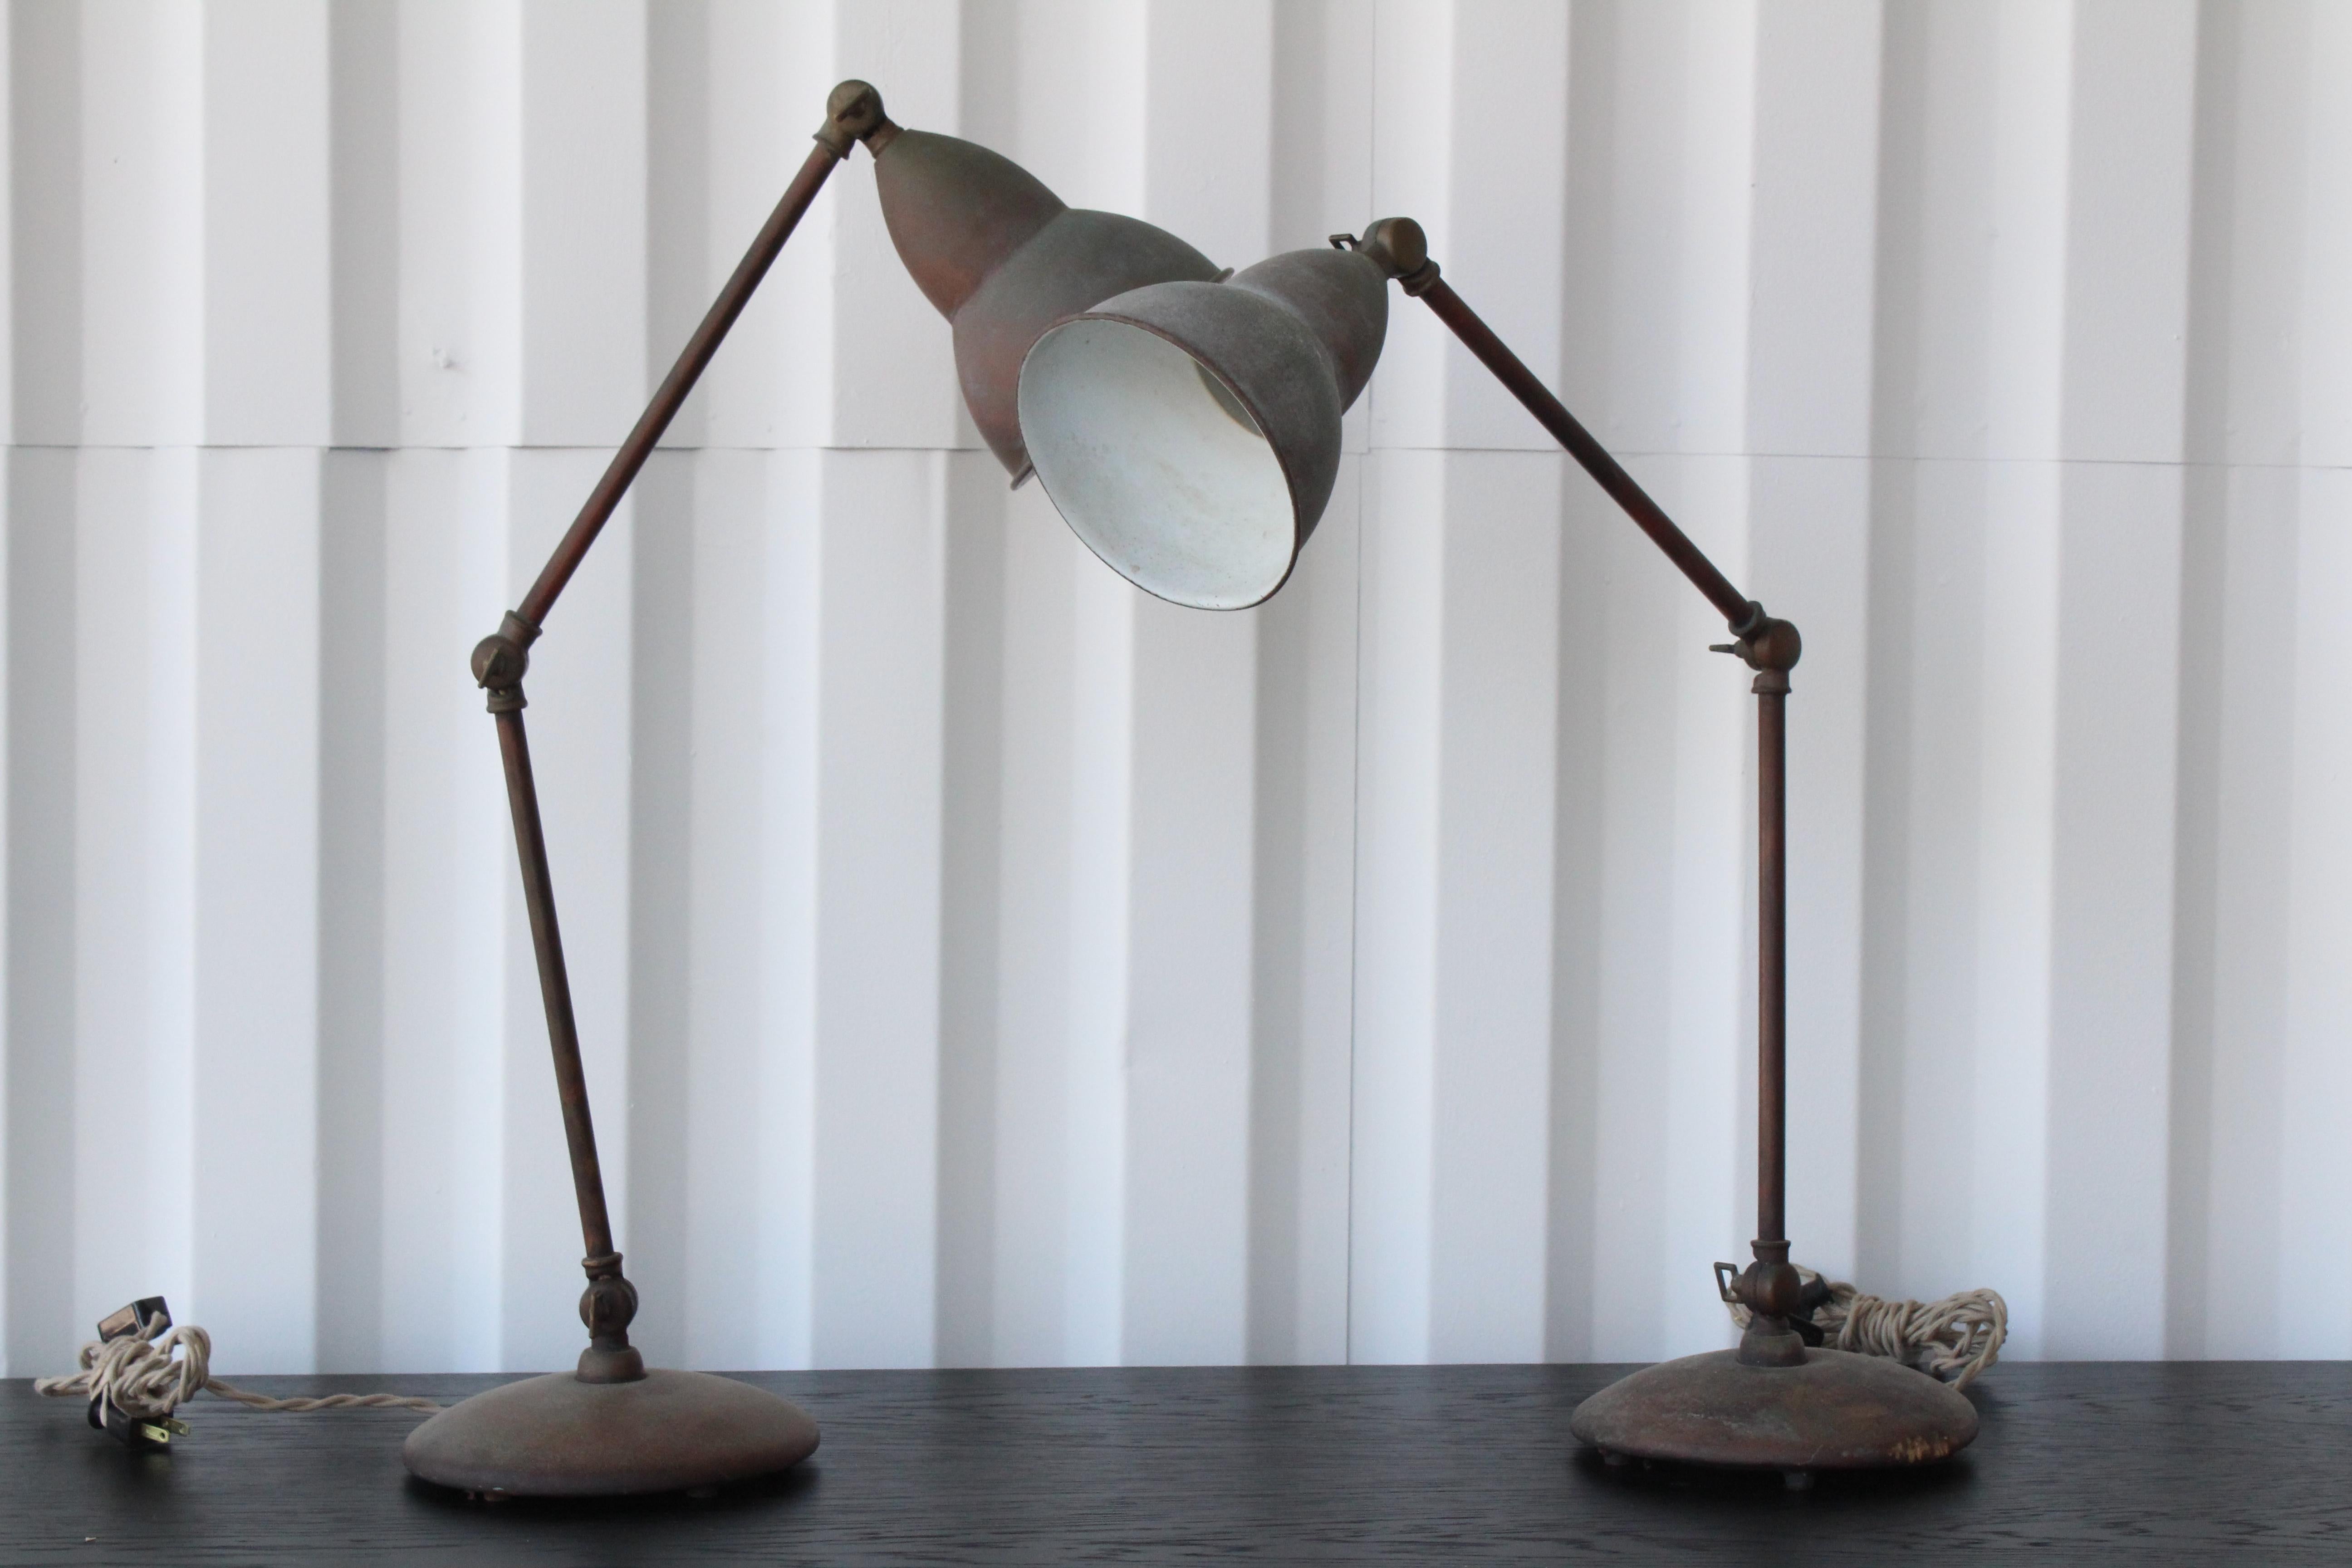 Pair of adjustable metal shop lamps with heavy patina. Pair available, sold individually. Newly rewired.